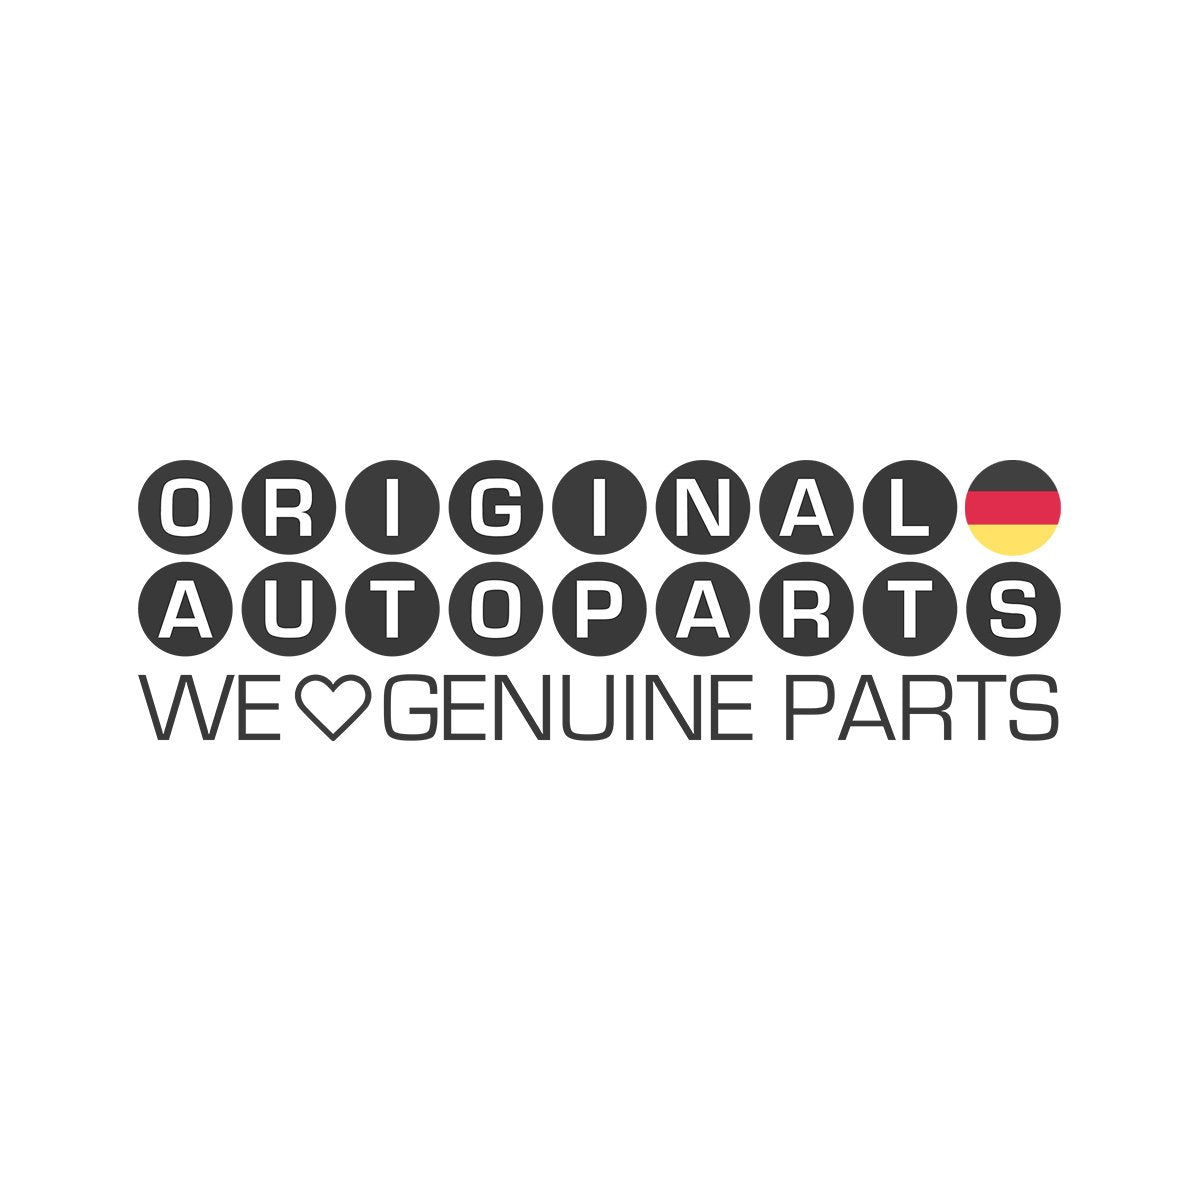 Genuine BMW BRAKE DISC ROTOR 34211160809 NO LONGER AVAILABLE, NEW CODE 34216758553